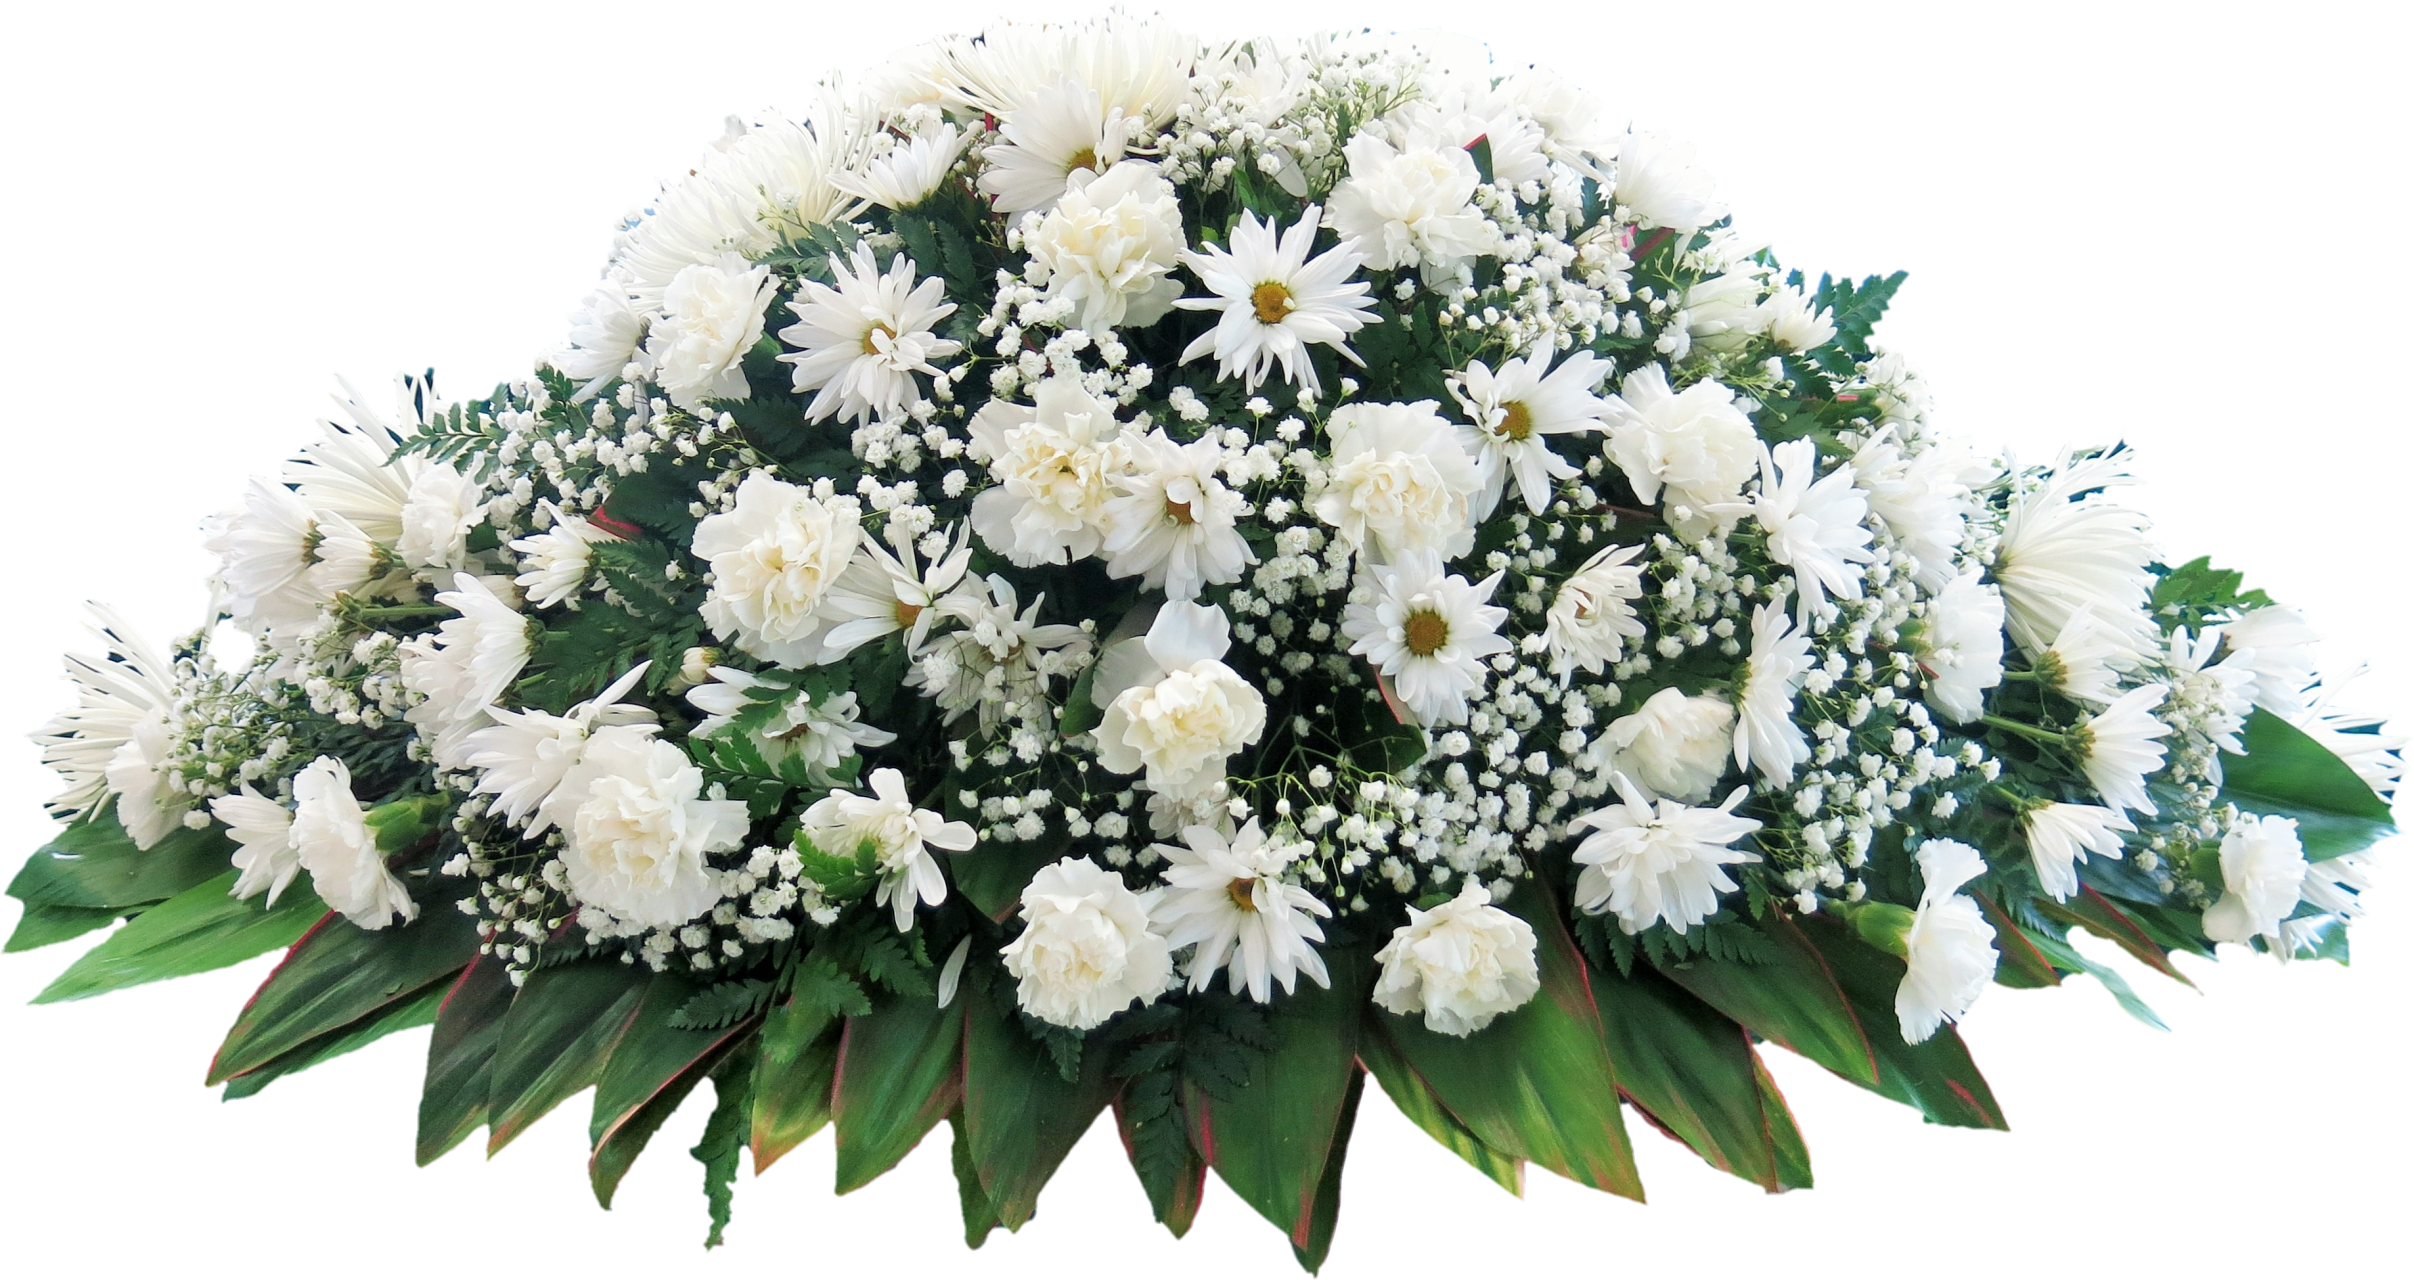 Funeral Flowers Bunch Transparent Background